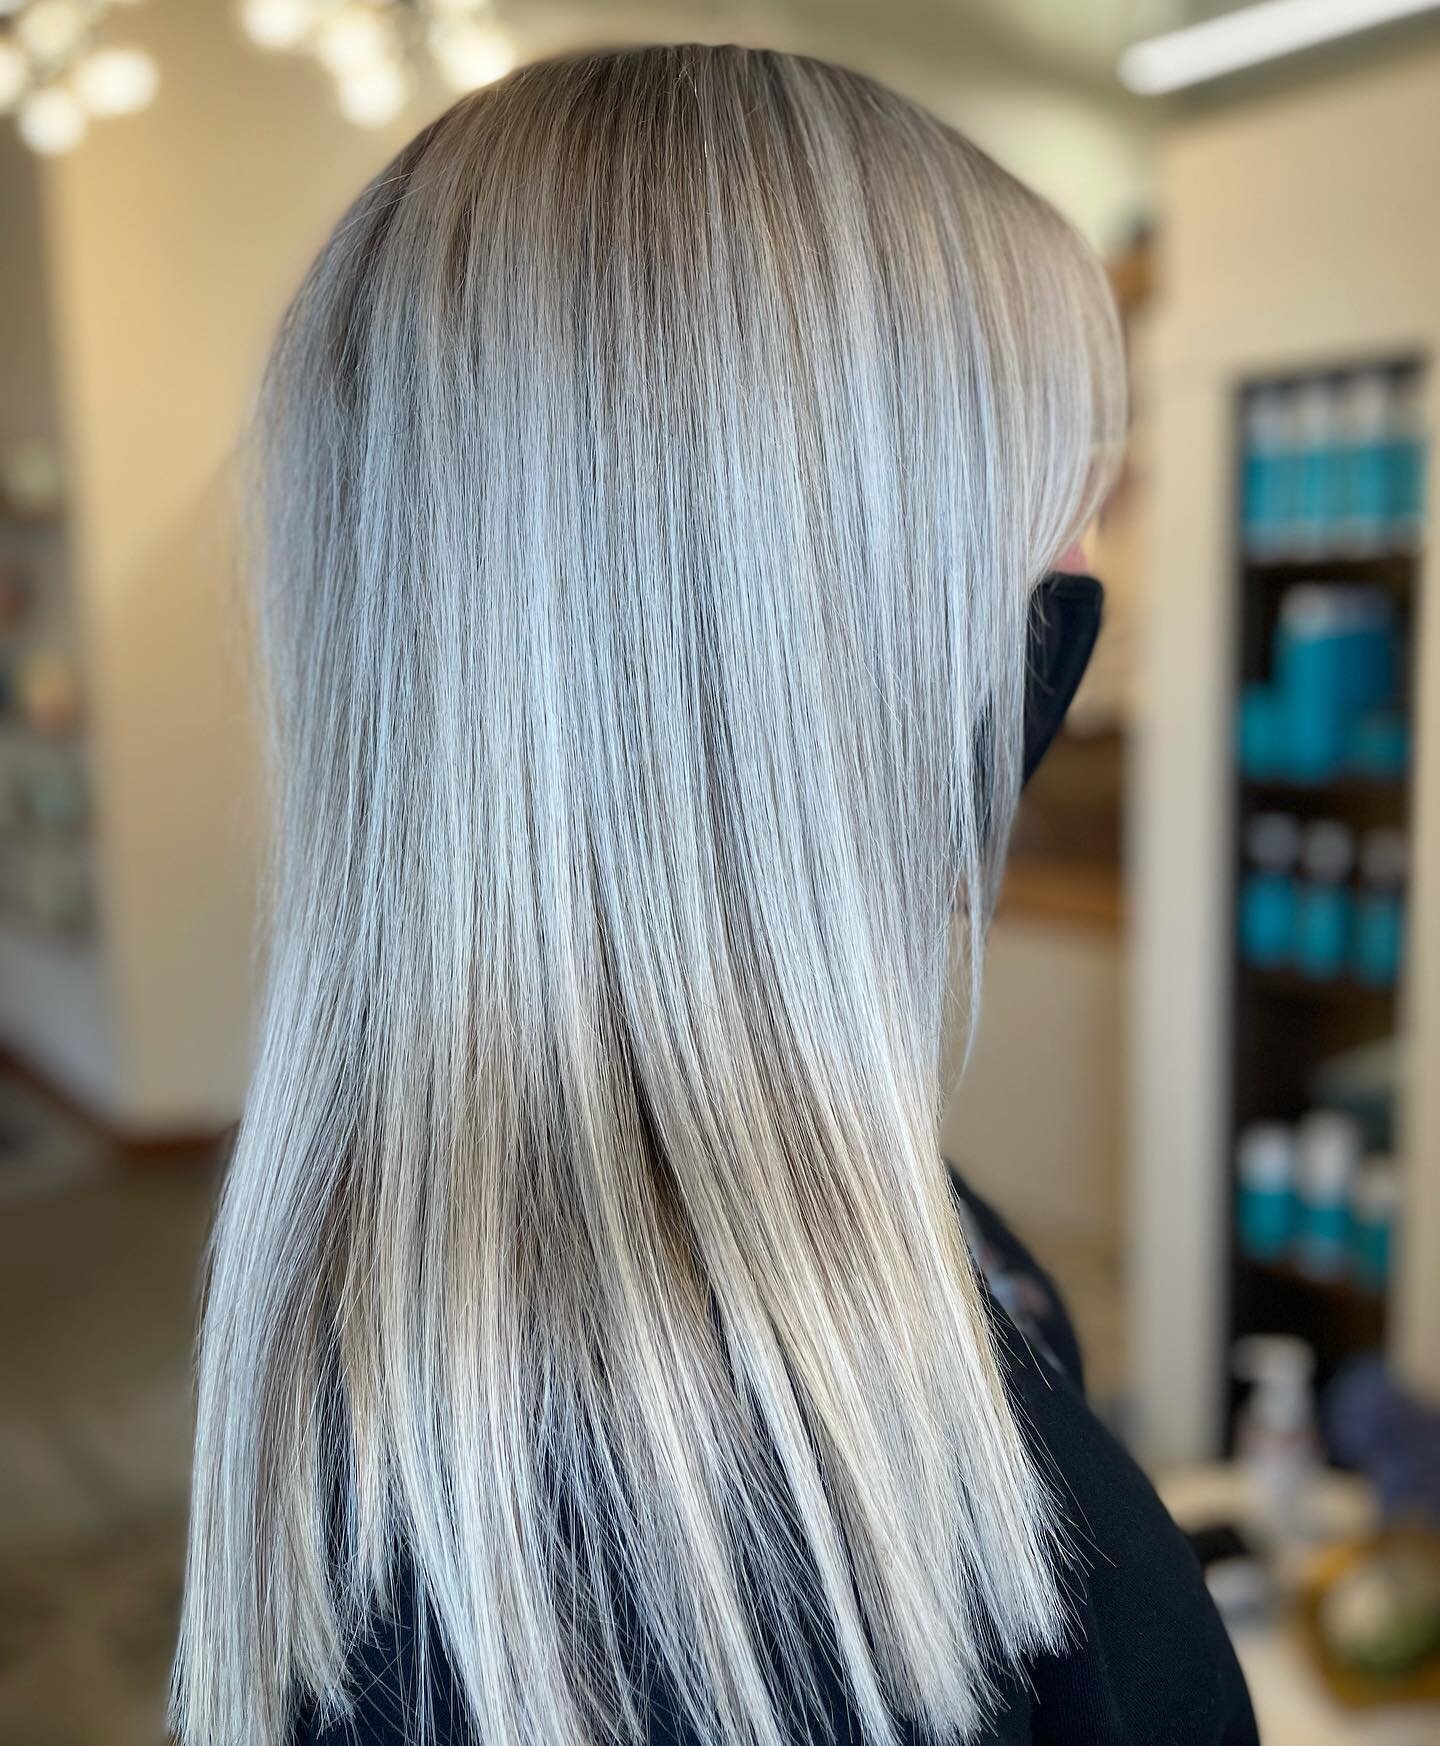 As blonde as possible 🧊
.
.
Text or DM me to book an appointment!
.
.
503.560.6363
.
.
#hairbyruthstrauss #coteriesalonpdx #portlandhairstylist #pdxhairstylist #behindthechair #balayage #balayagist #bestofbalayage